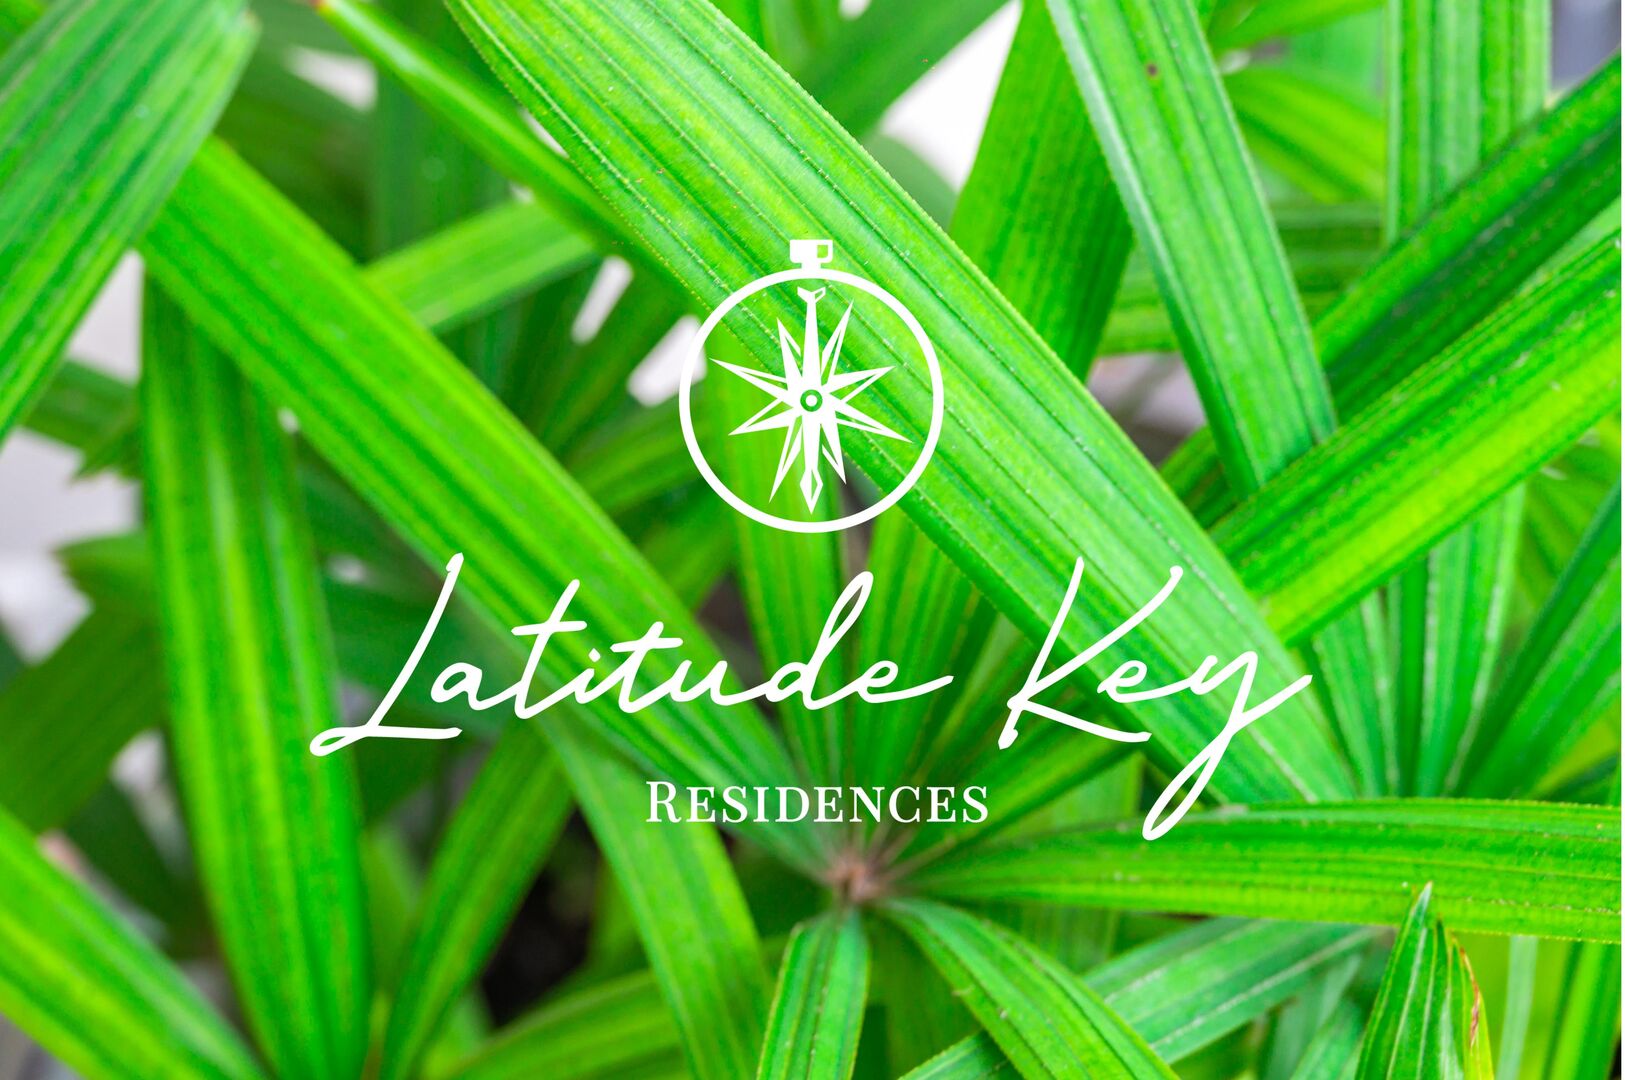 Sugar Key is part of the Residences Collection. Enjoy a stress free vacation with Latitude Key - Curated Vacation Properties